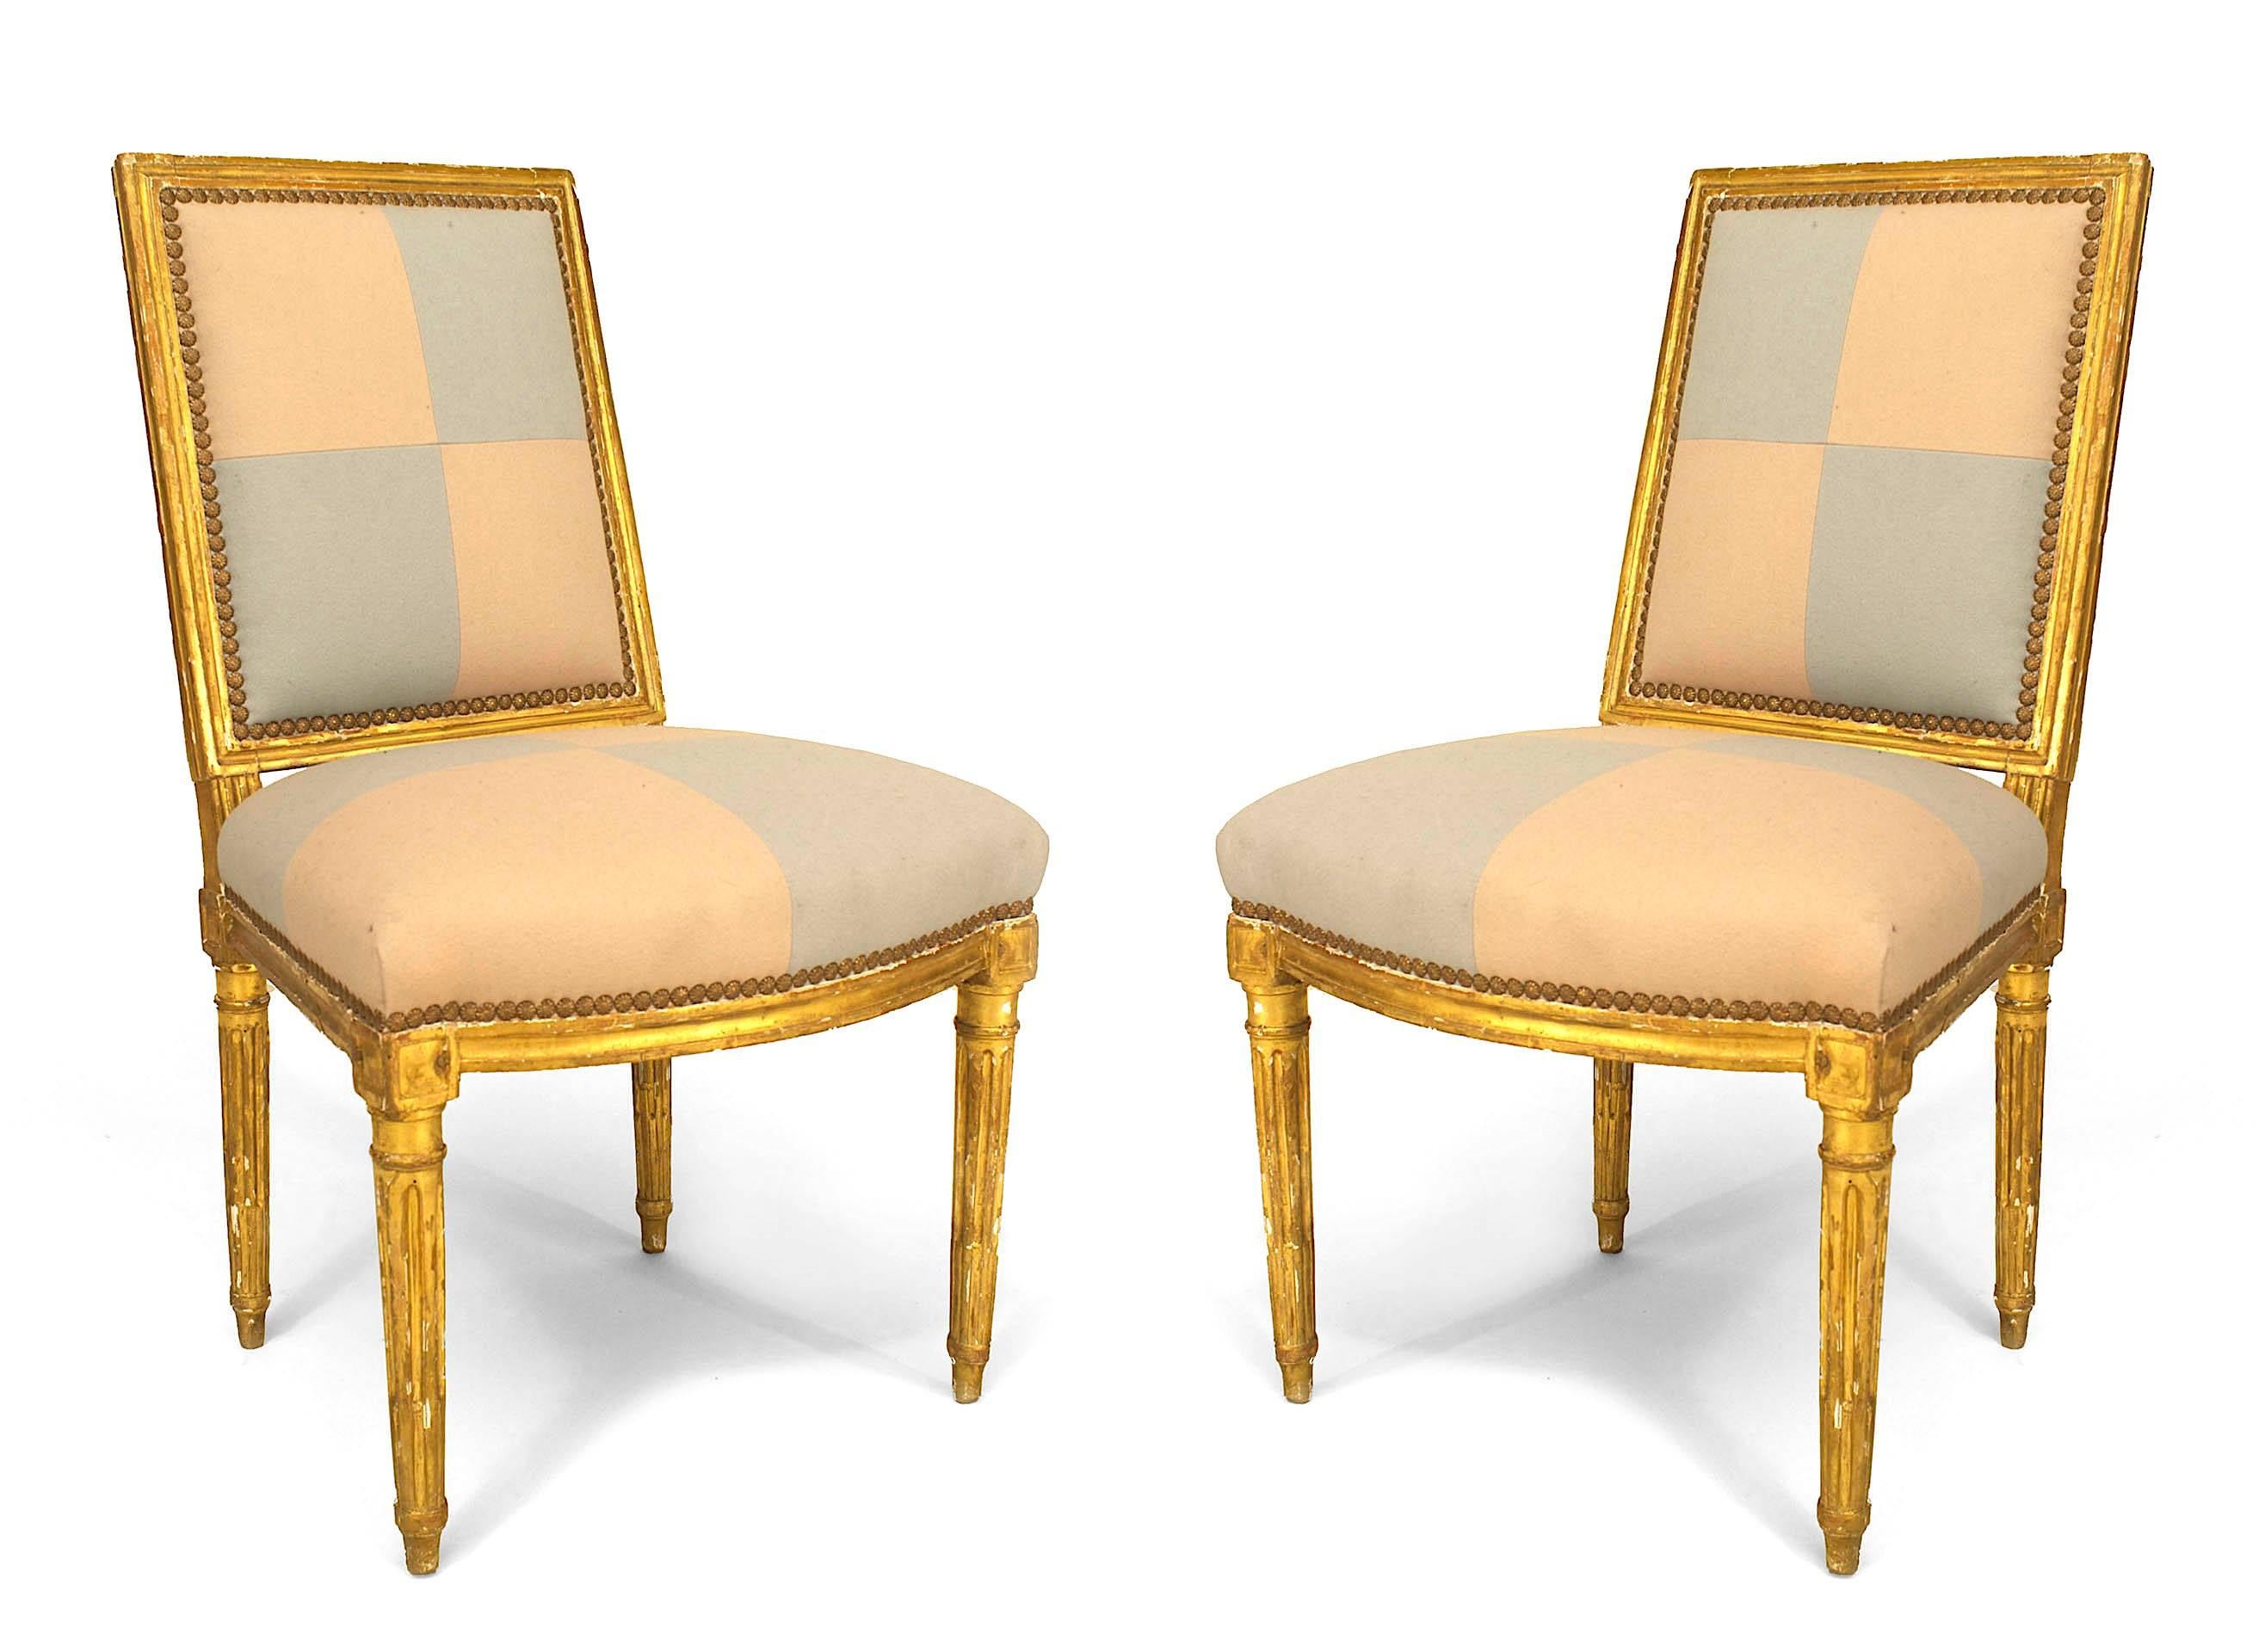 Pair of French Louis XVI (18th Cent) gilt side chairs with square back and upholstered in beige and blue square pattern on seat and back.
